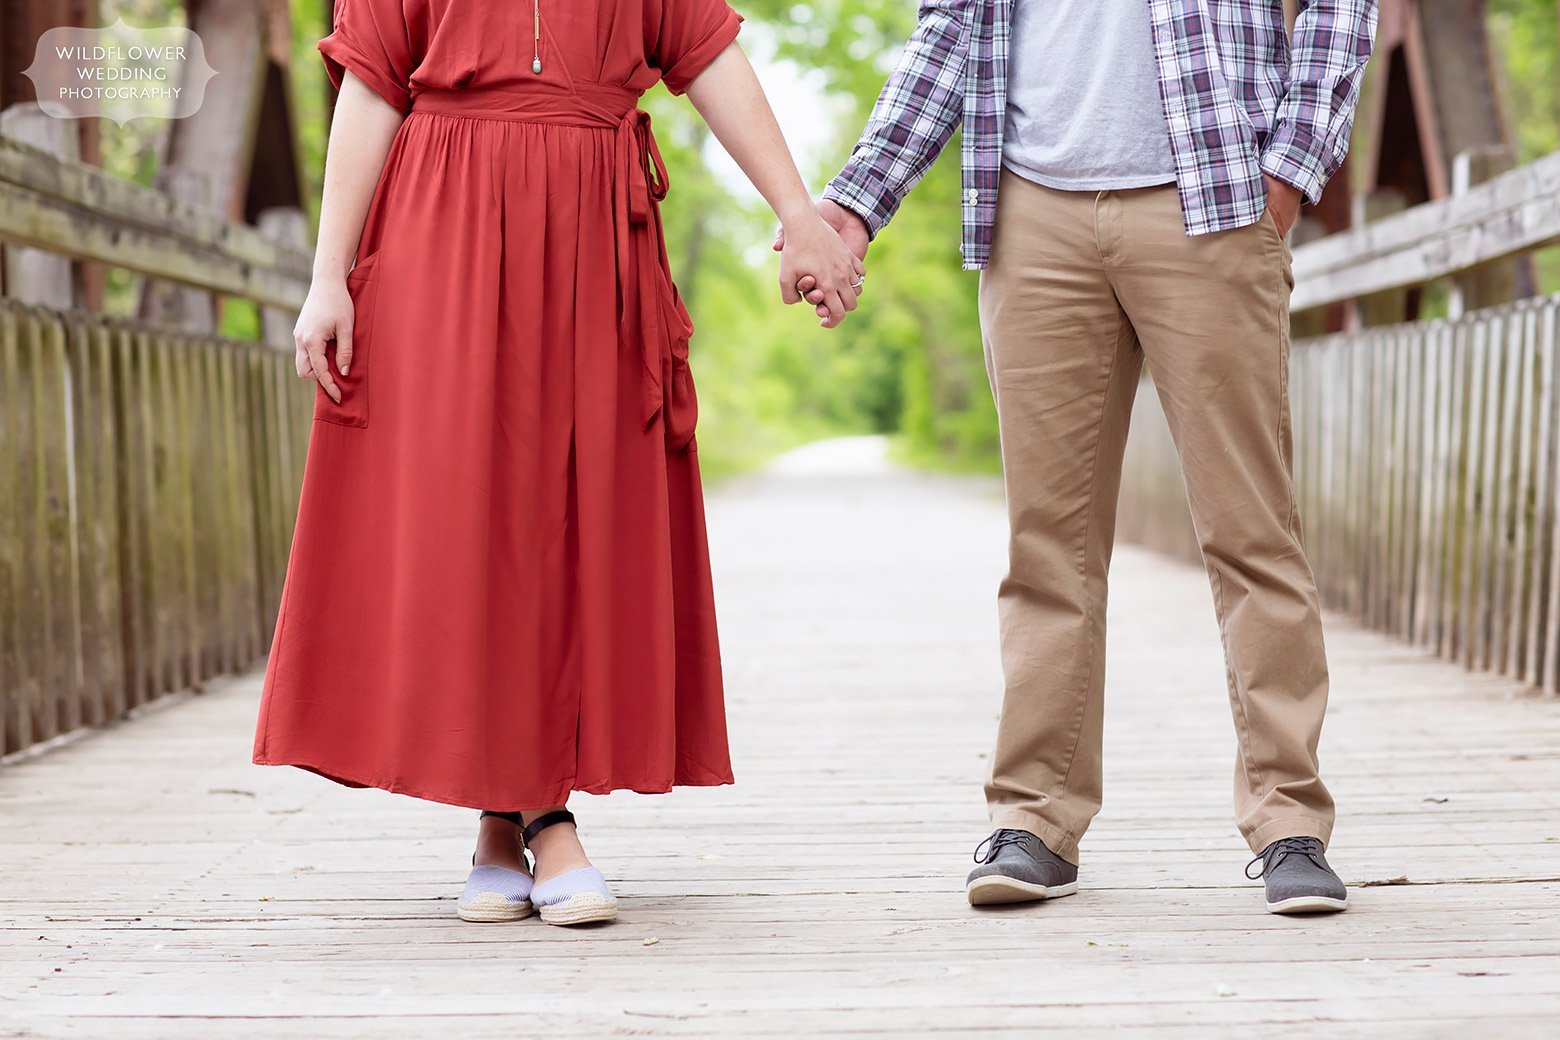 Girl in red dress and boy in plaid holding hands along bike path.